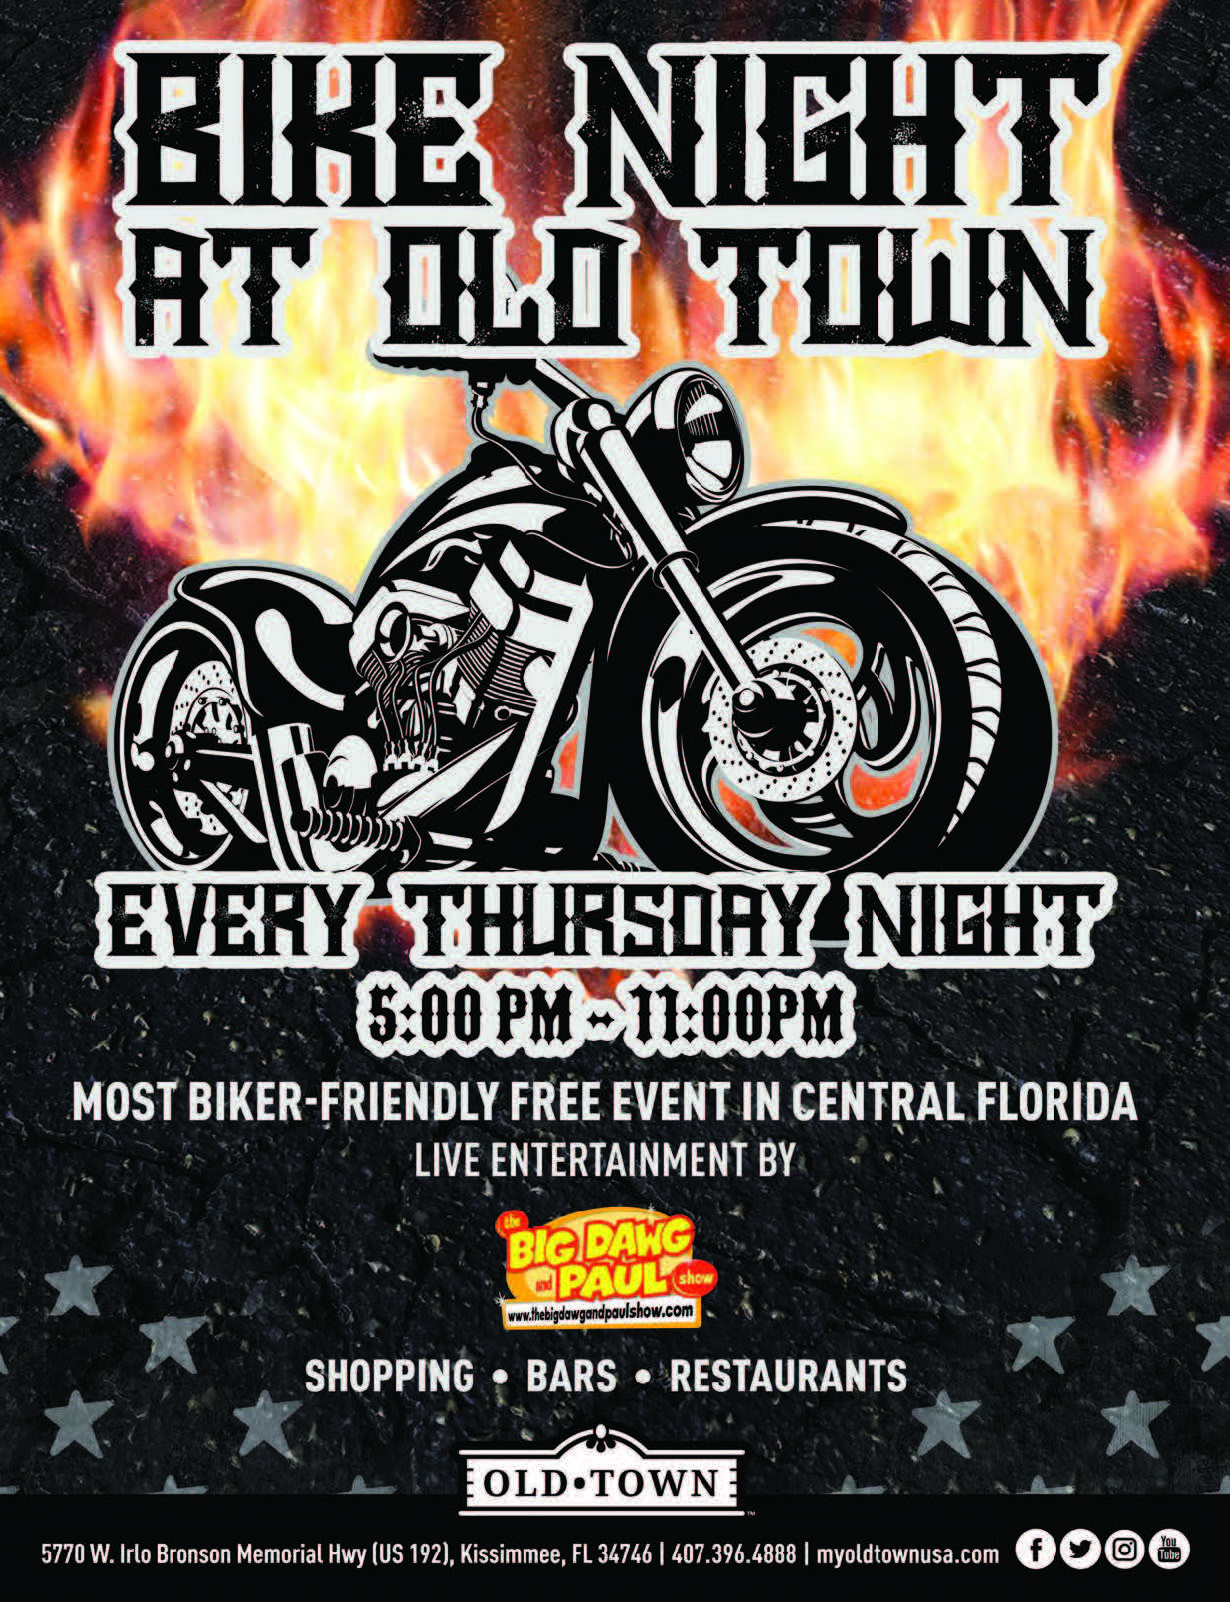 Born To Ride Motorcycle Events Calendar | Born To Ride Motorcycle Magazine ...